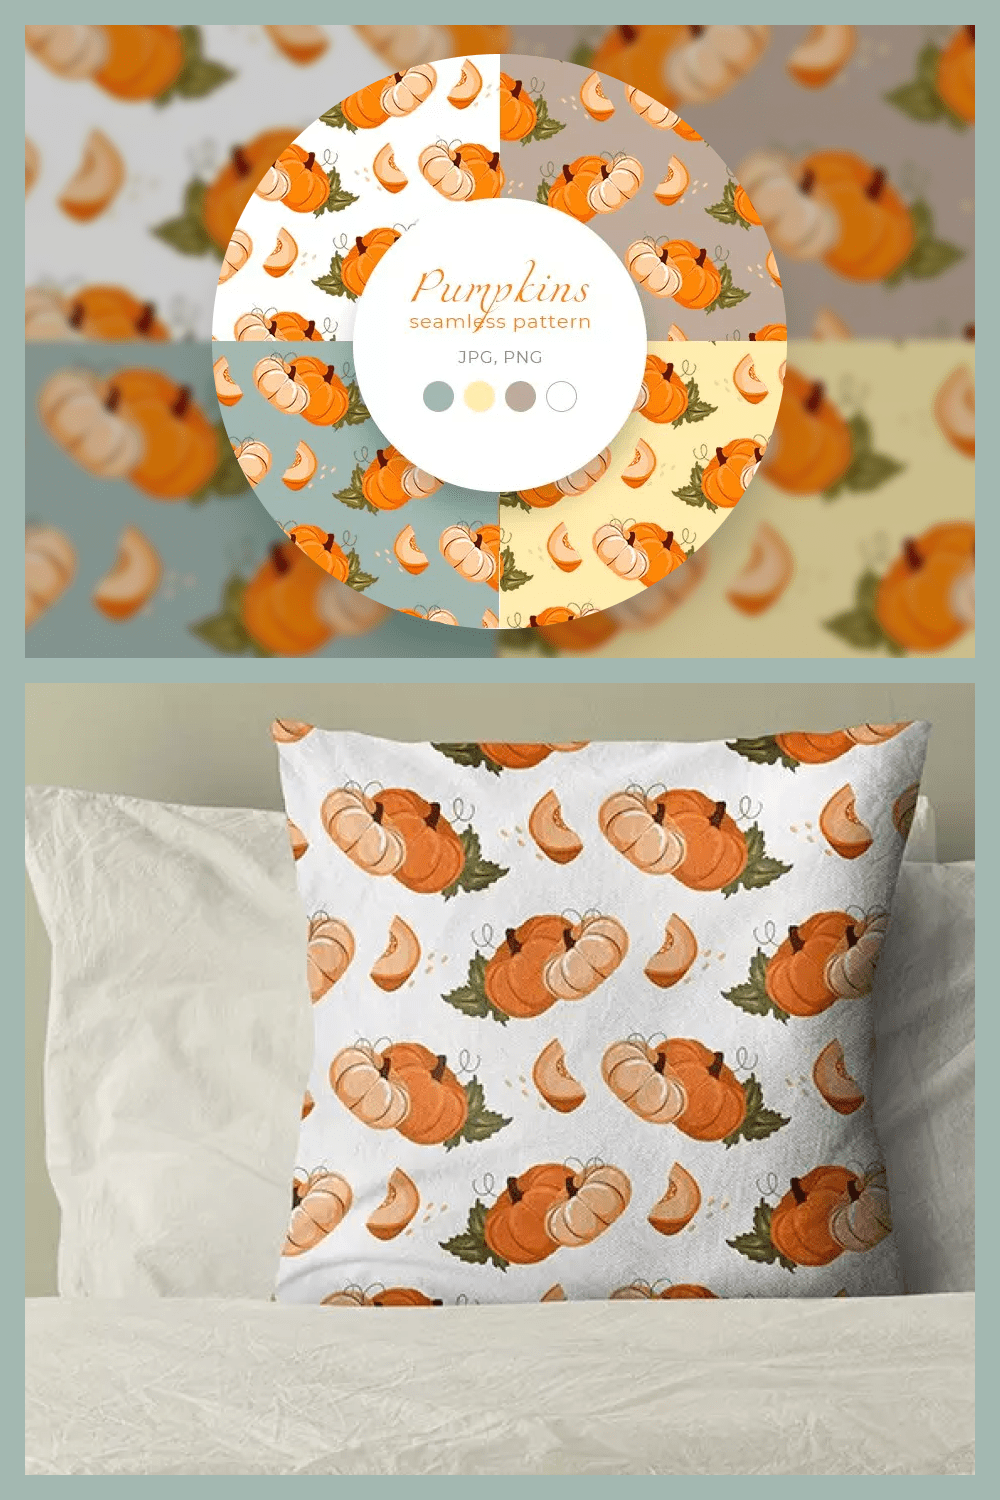 A pillow with orange pumpkins on it lies on the bed.